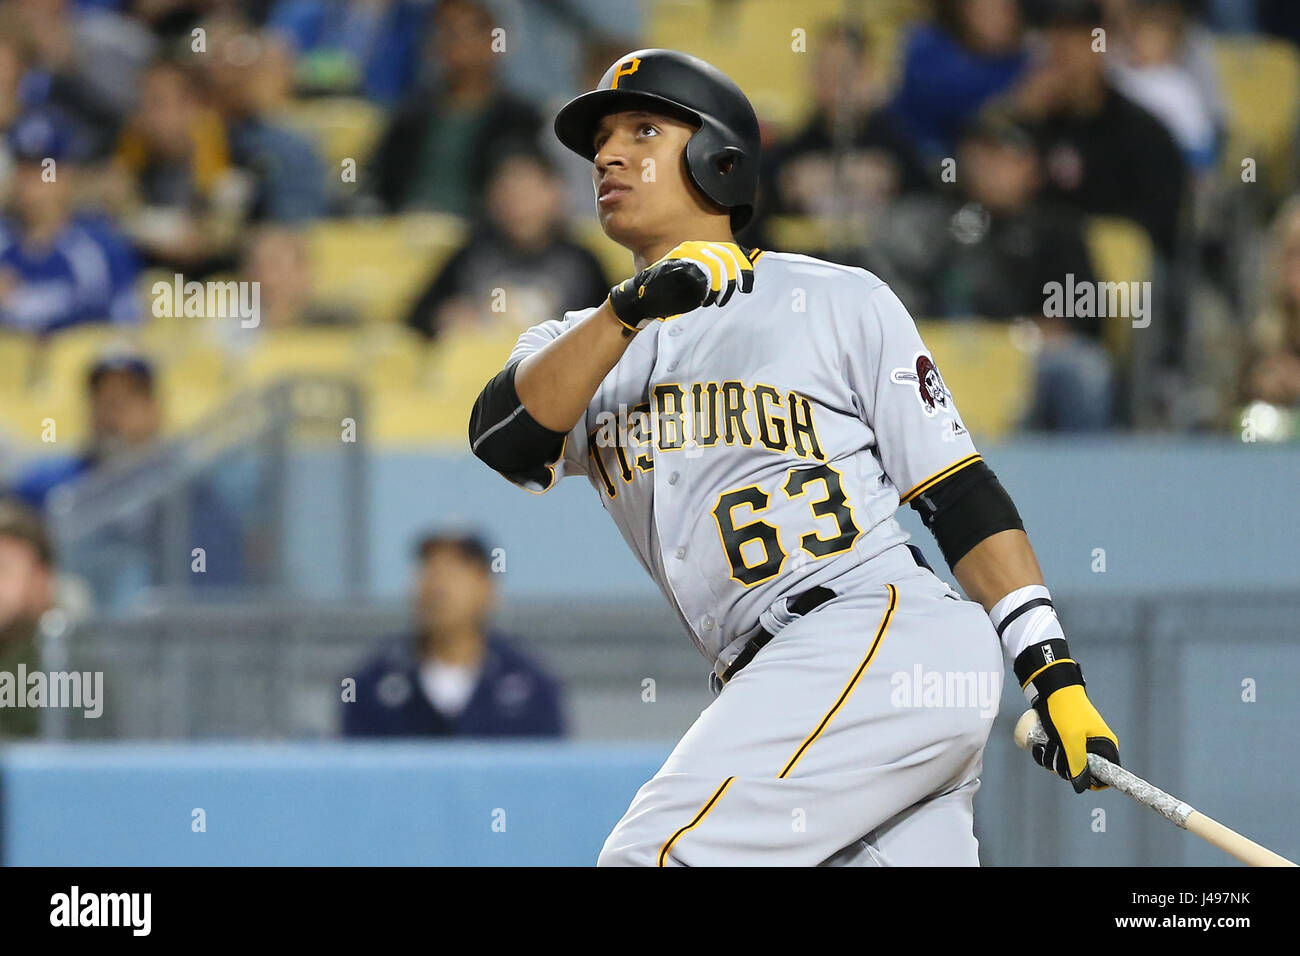 Los Angeles, CA, USA. 9th May, 2017. Pittsburgh Pirates left fielder Chris Bostick #63 watches a deep shot sail just foul in the game between the Pittsburg Pirates and the Los Angeles Dodgers, Dodger Stadium in Los Angeles, CA. Credit: csm/Alamy Live News Stock Photo